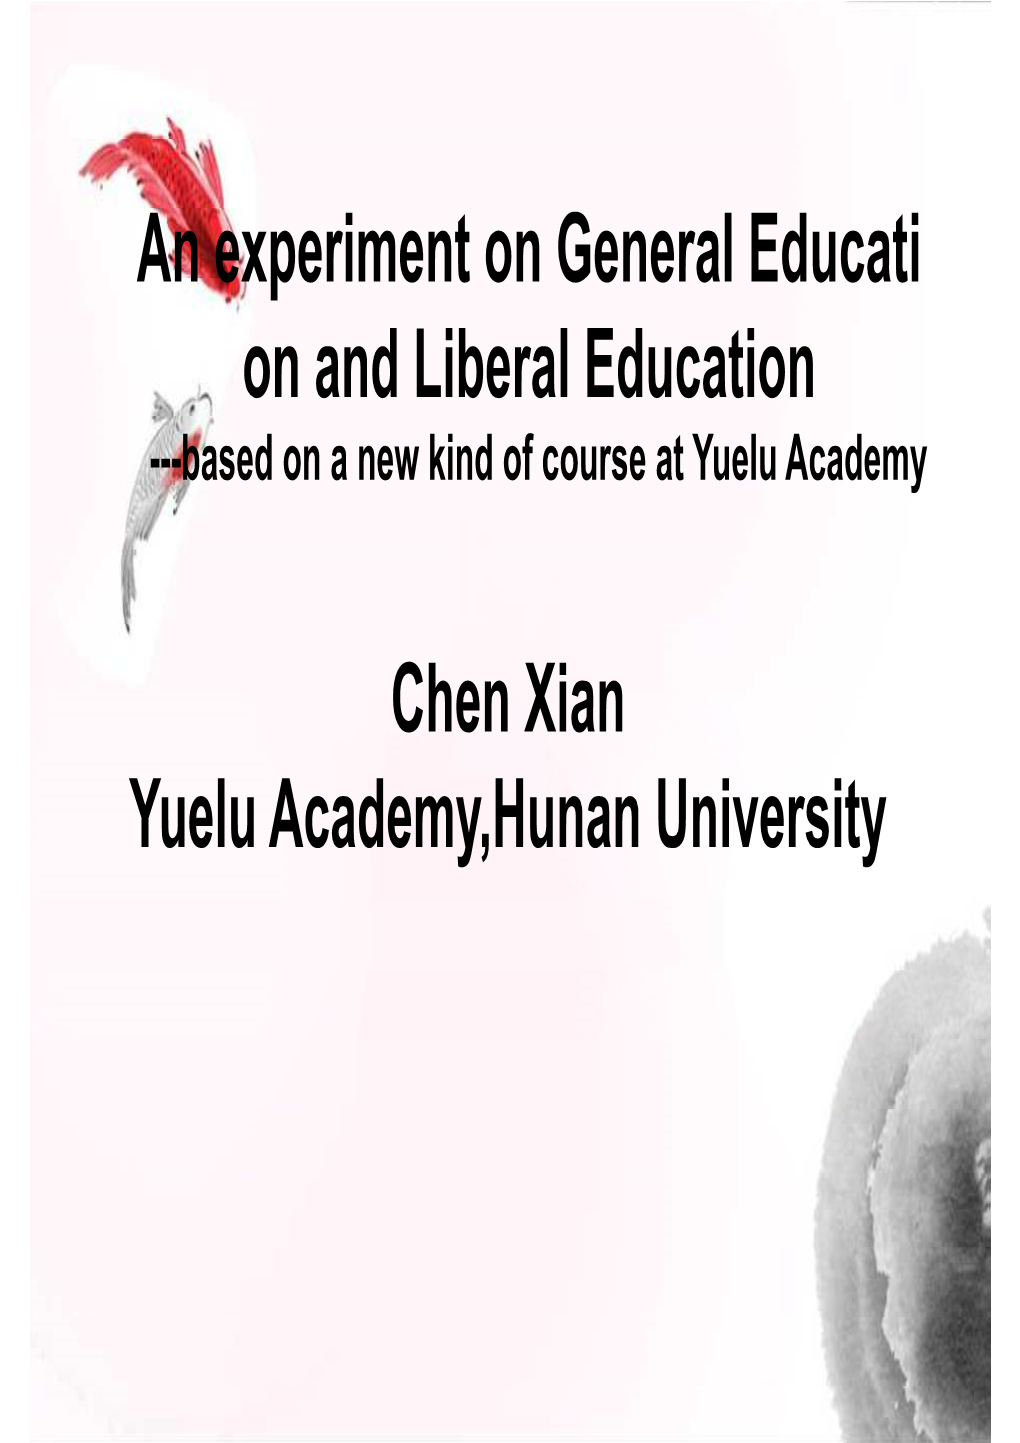 Based on a New Kind of Course at Yuelu Academy 1.Education Style General Vs Professional